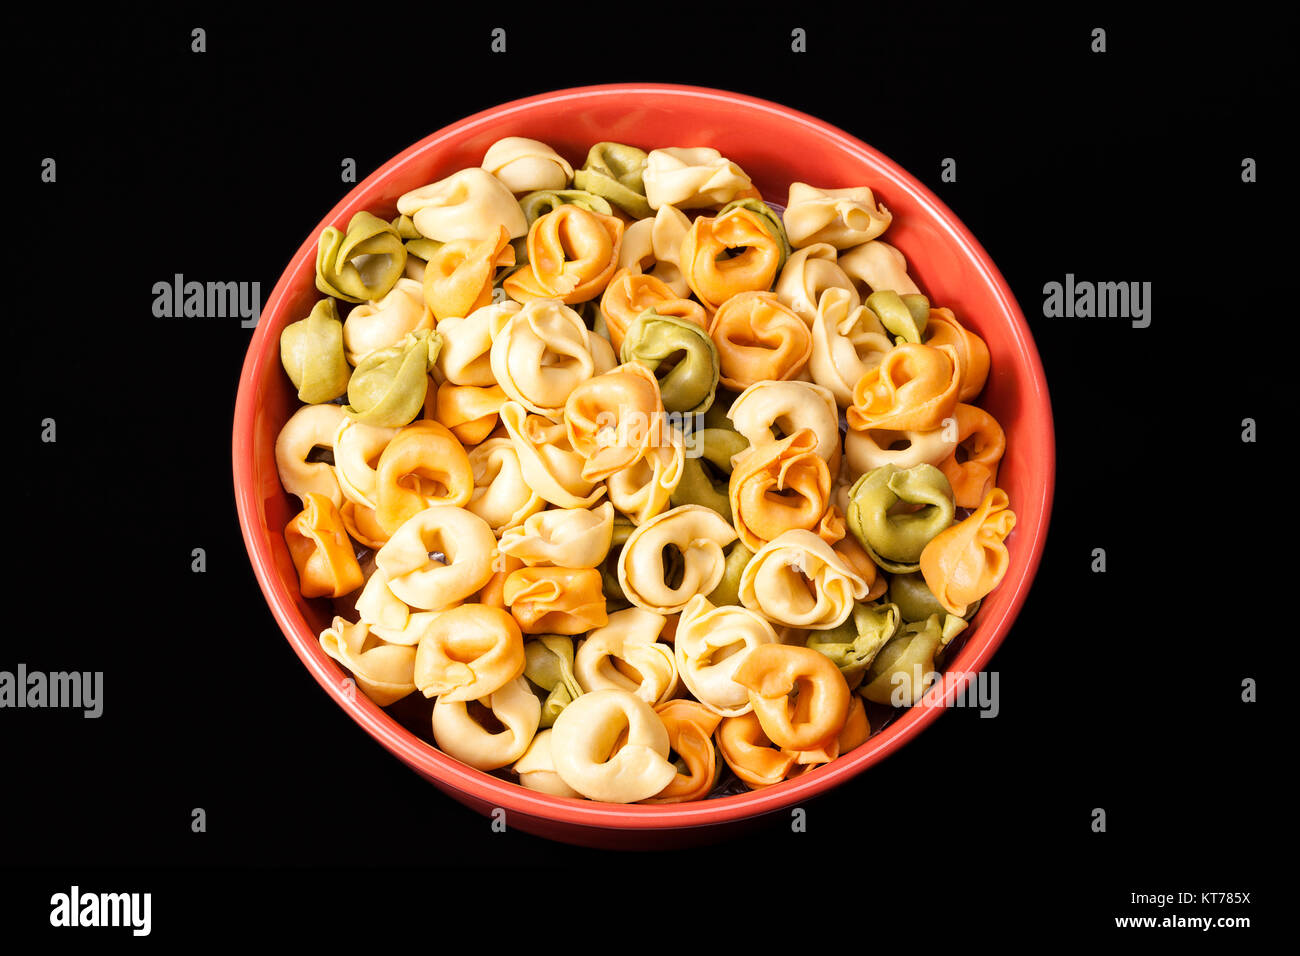 Colored tortellini, ring-shaped pasta in red bowl Stock Photo